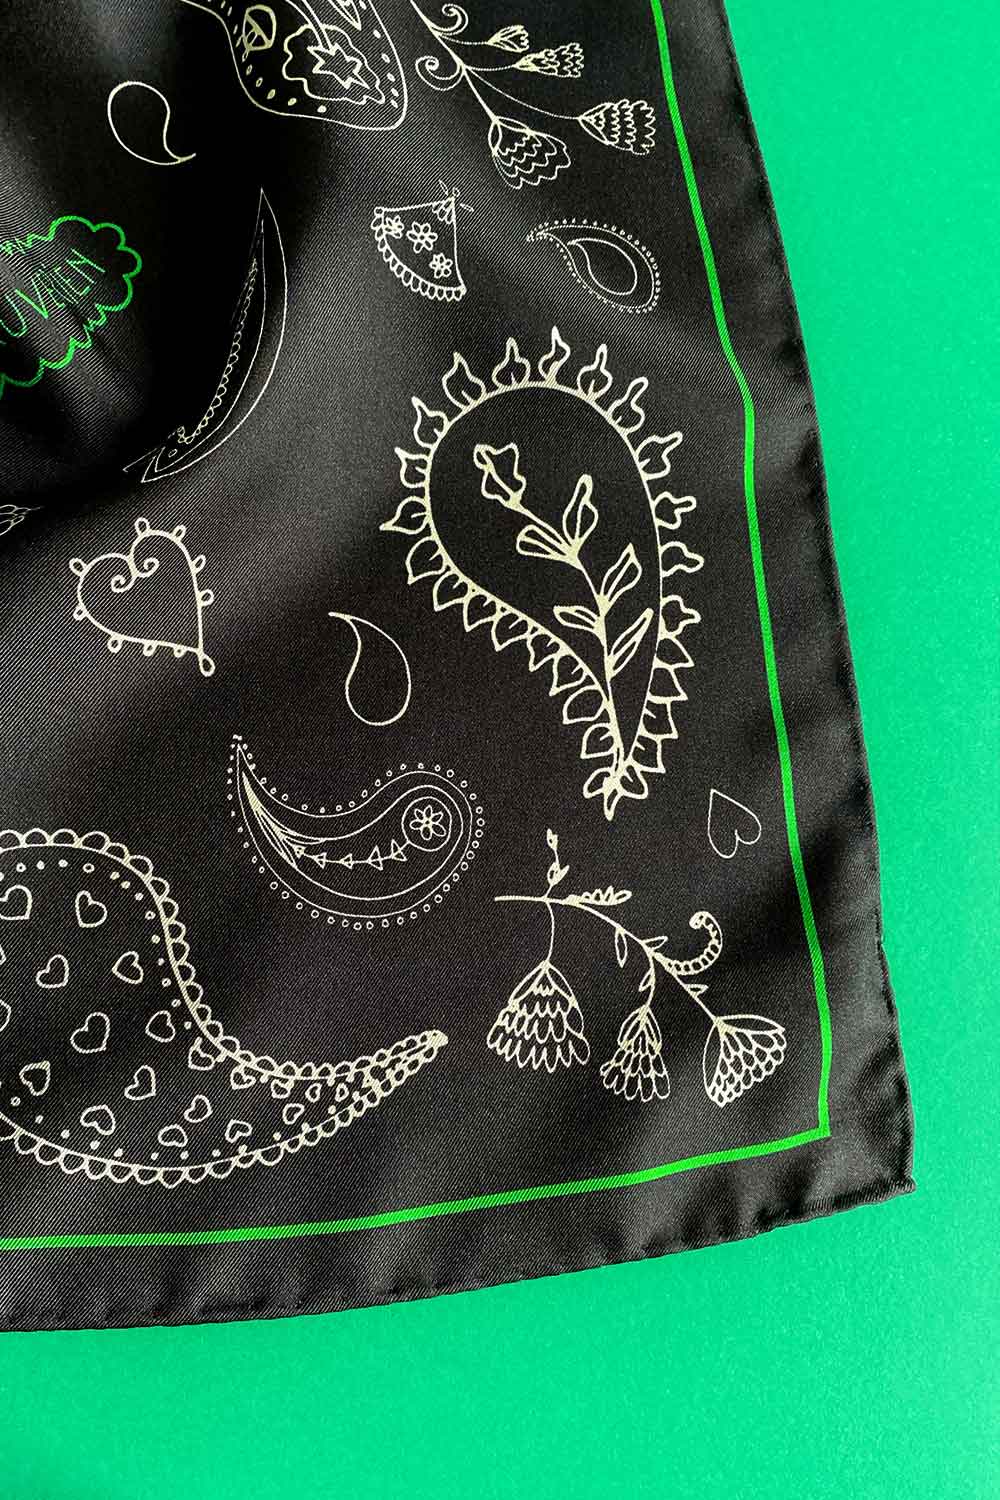 Hand finished detail of black scarf with white and green paisley motif.